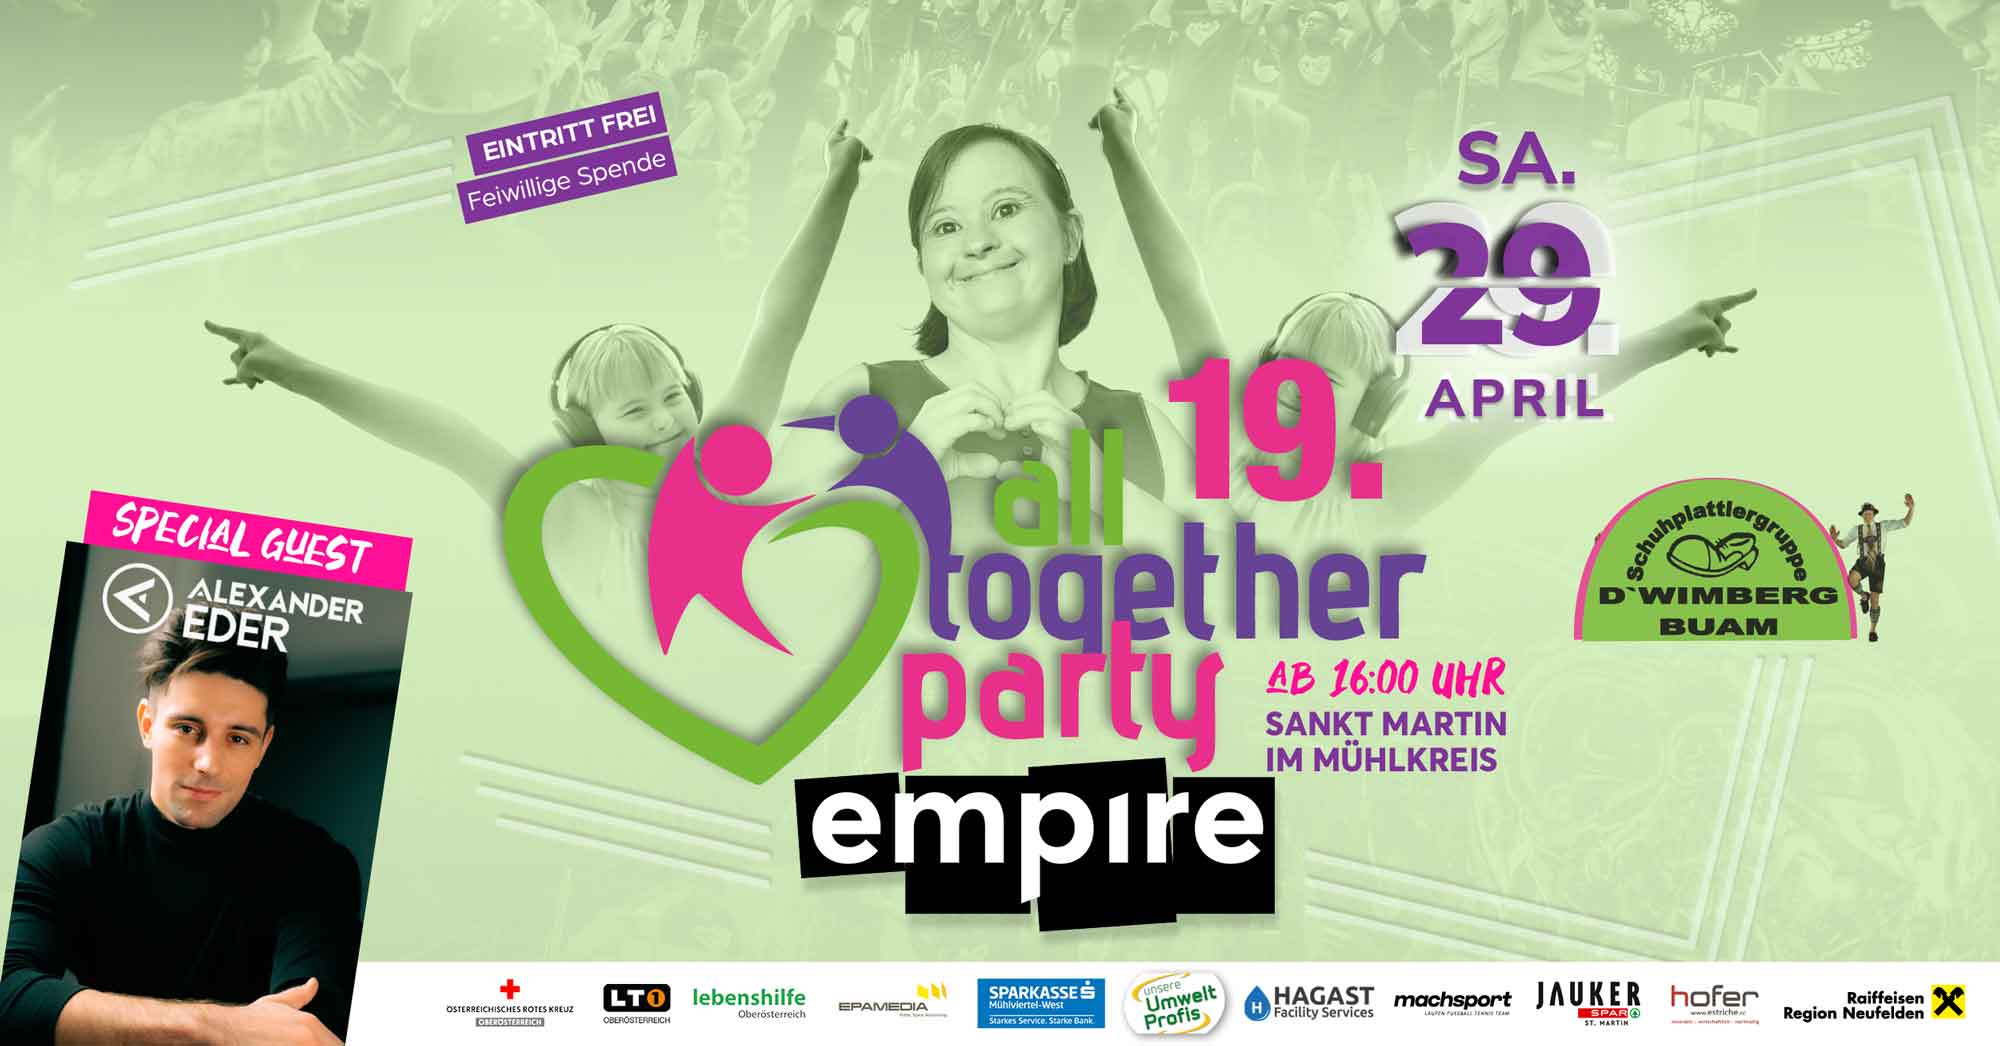 19. All together Party | SA 29.04.